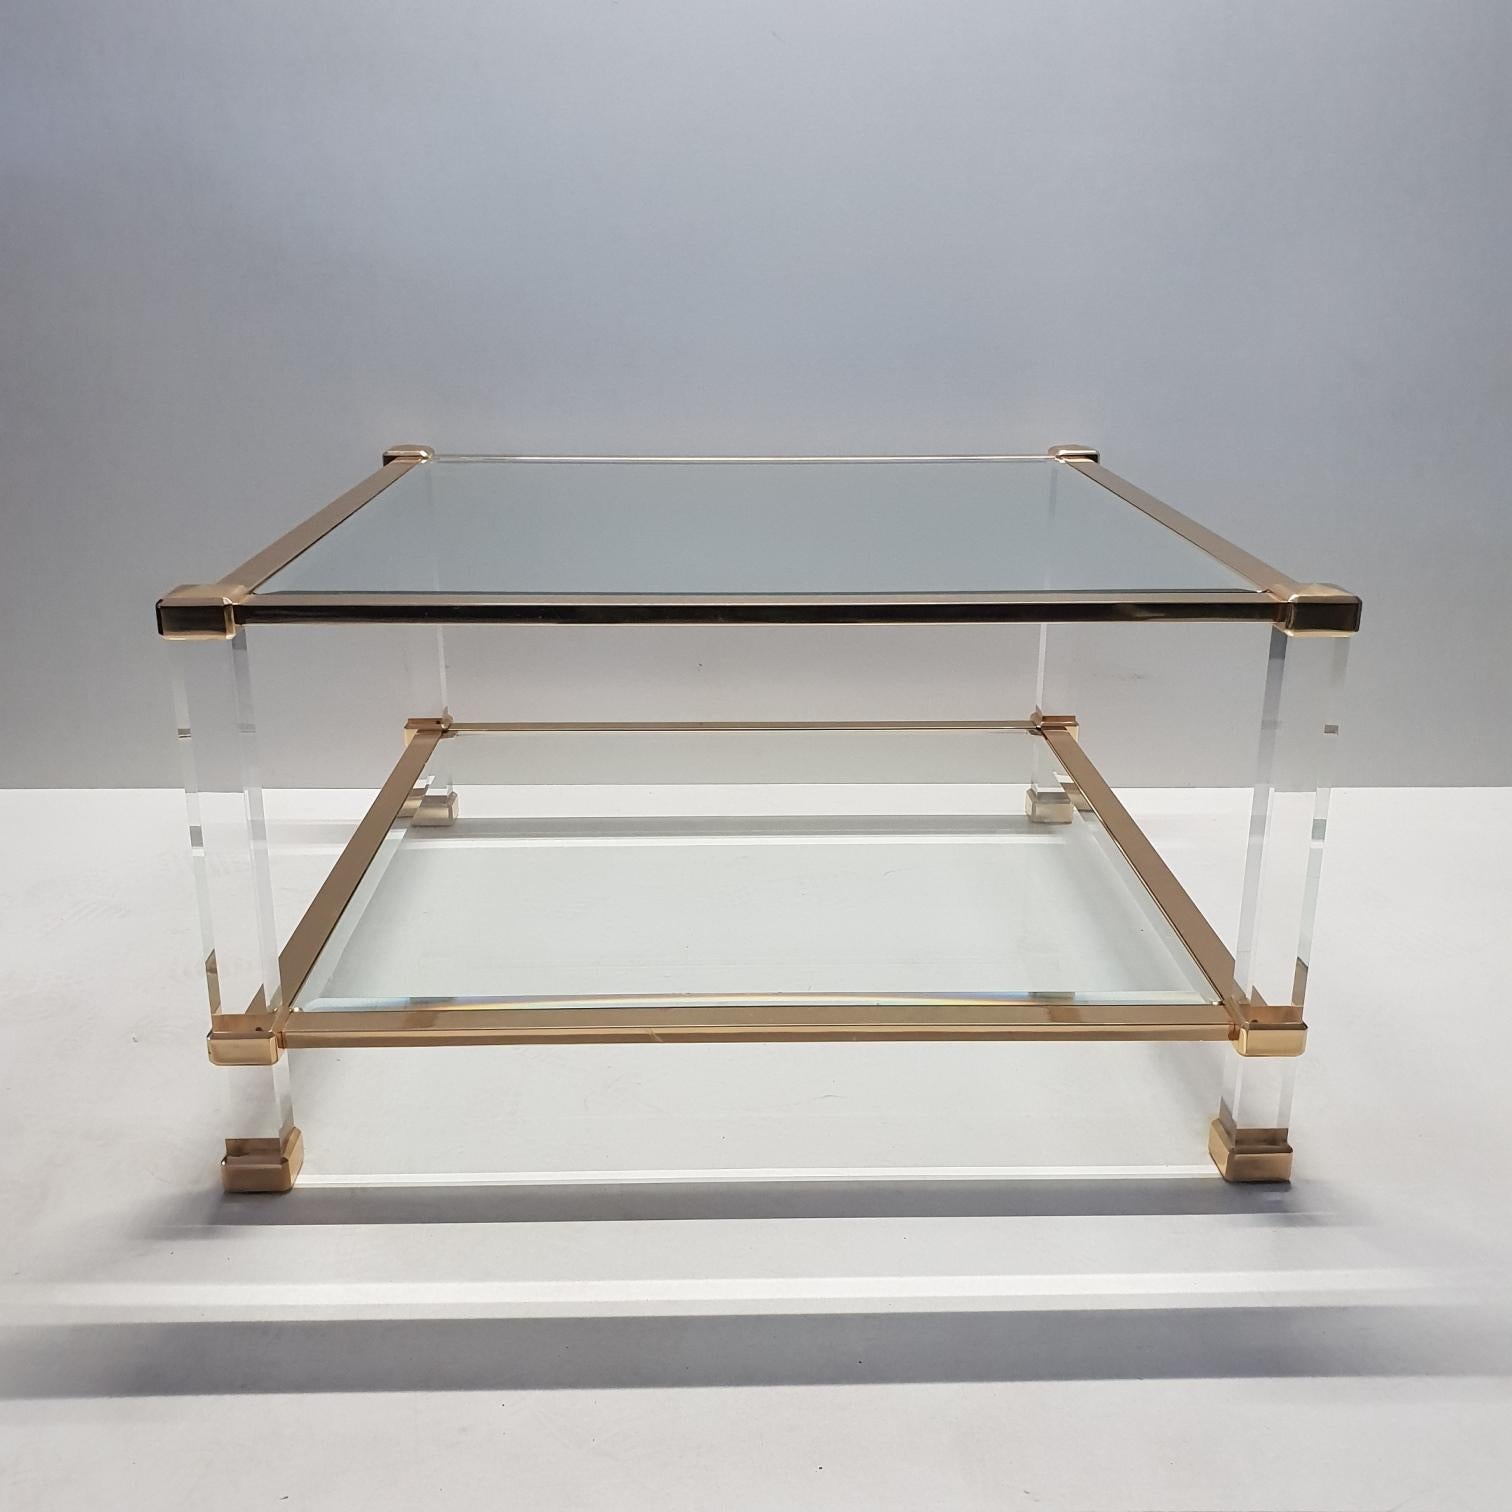 Faceted Italian Lucite and Brass Square Coffee Table by Orsenigo 'Marked', 1970s